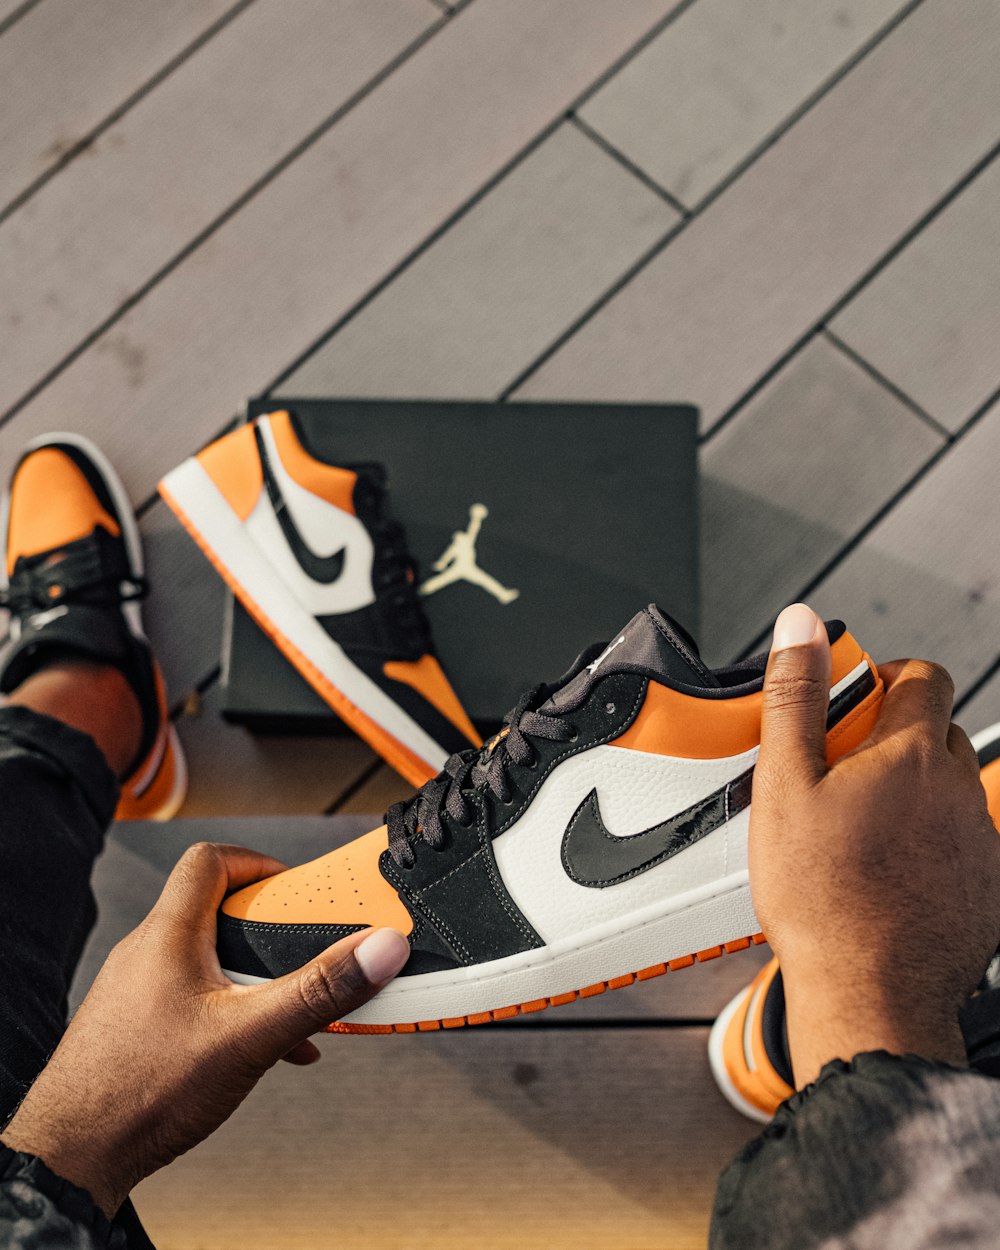 Person sitting and holding white, orange, and black Air Jordan 1 low-top  sneaker photo – Free Shattered backboard Image on Unsplash